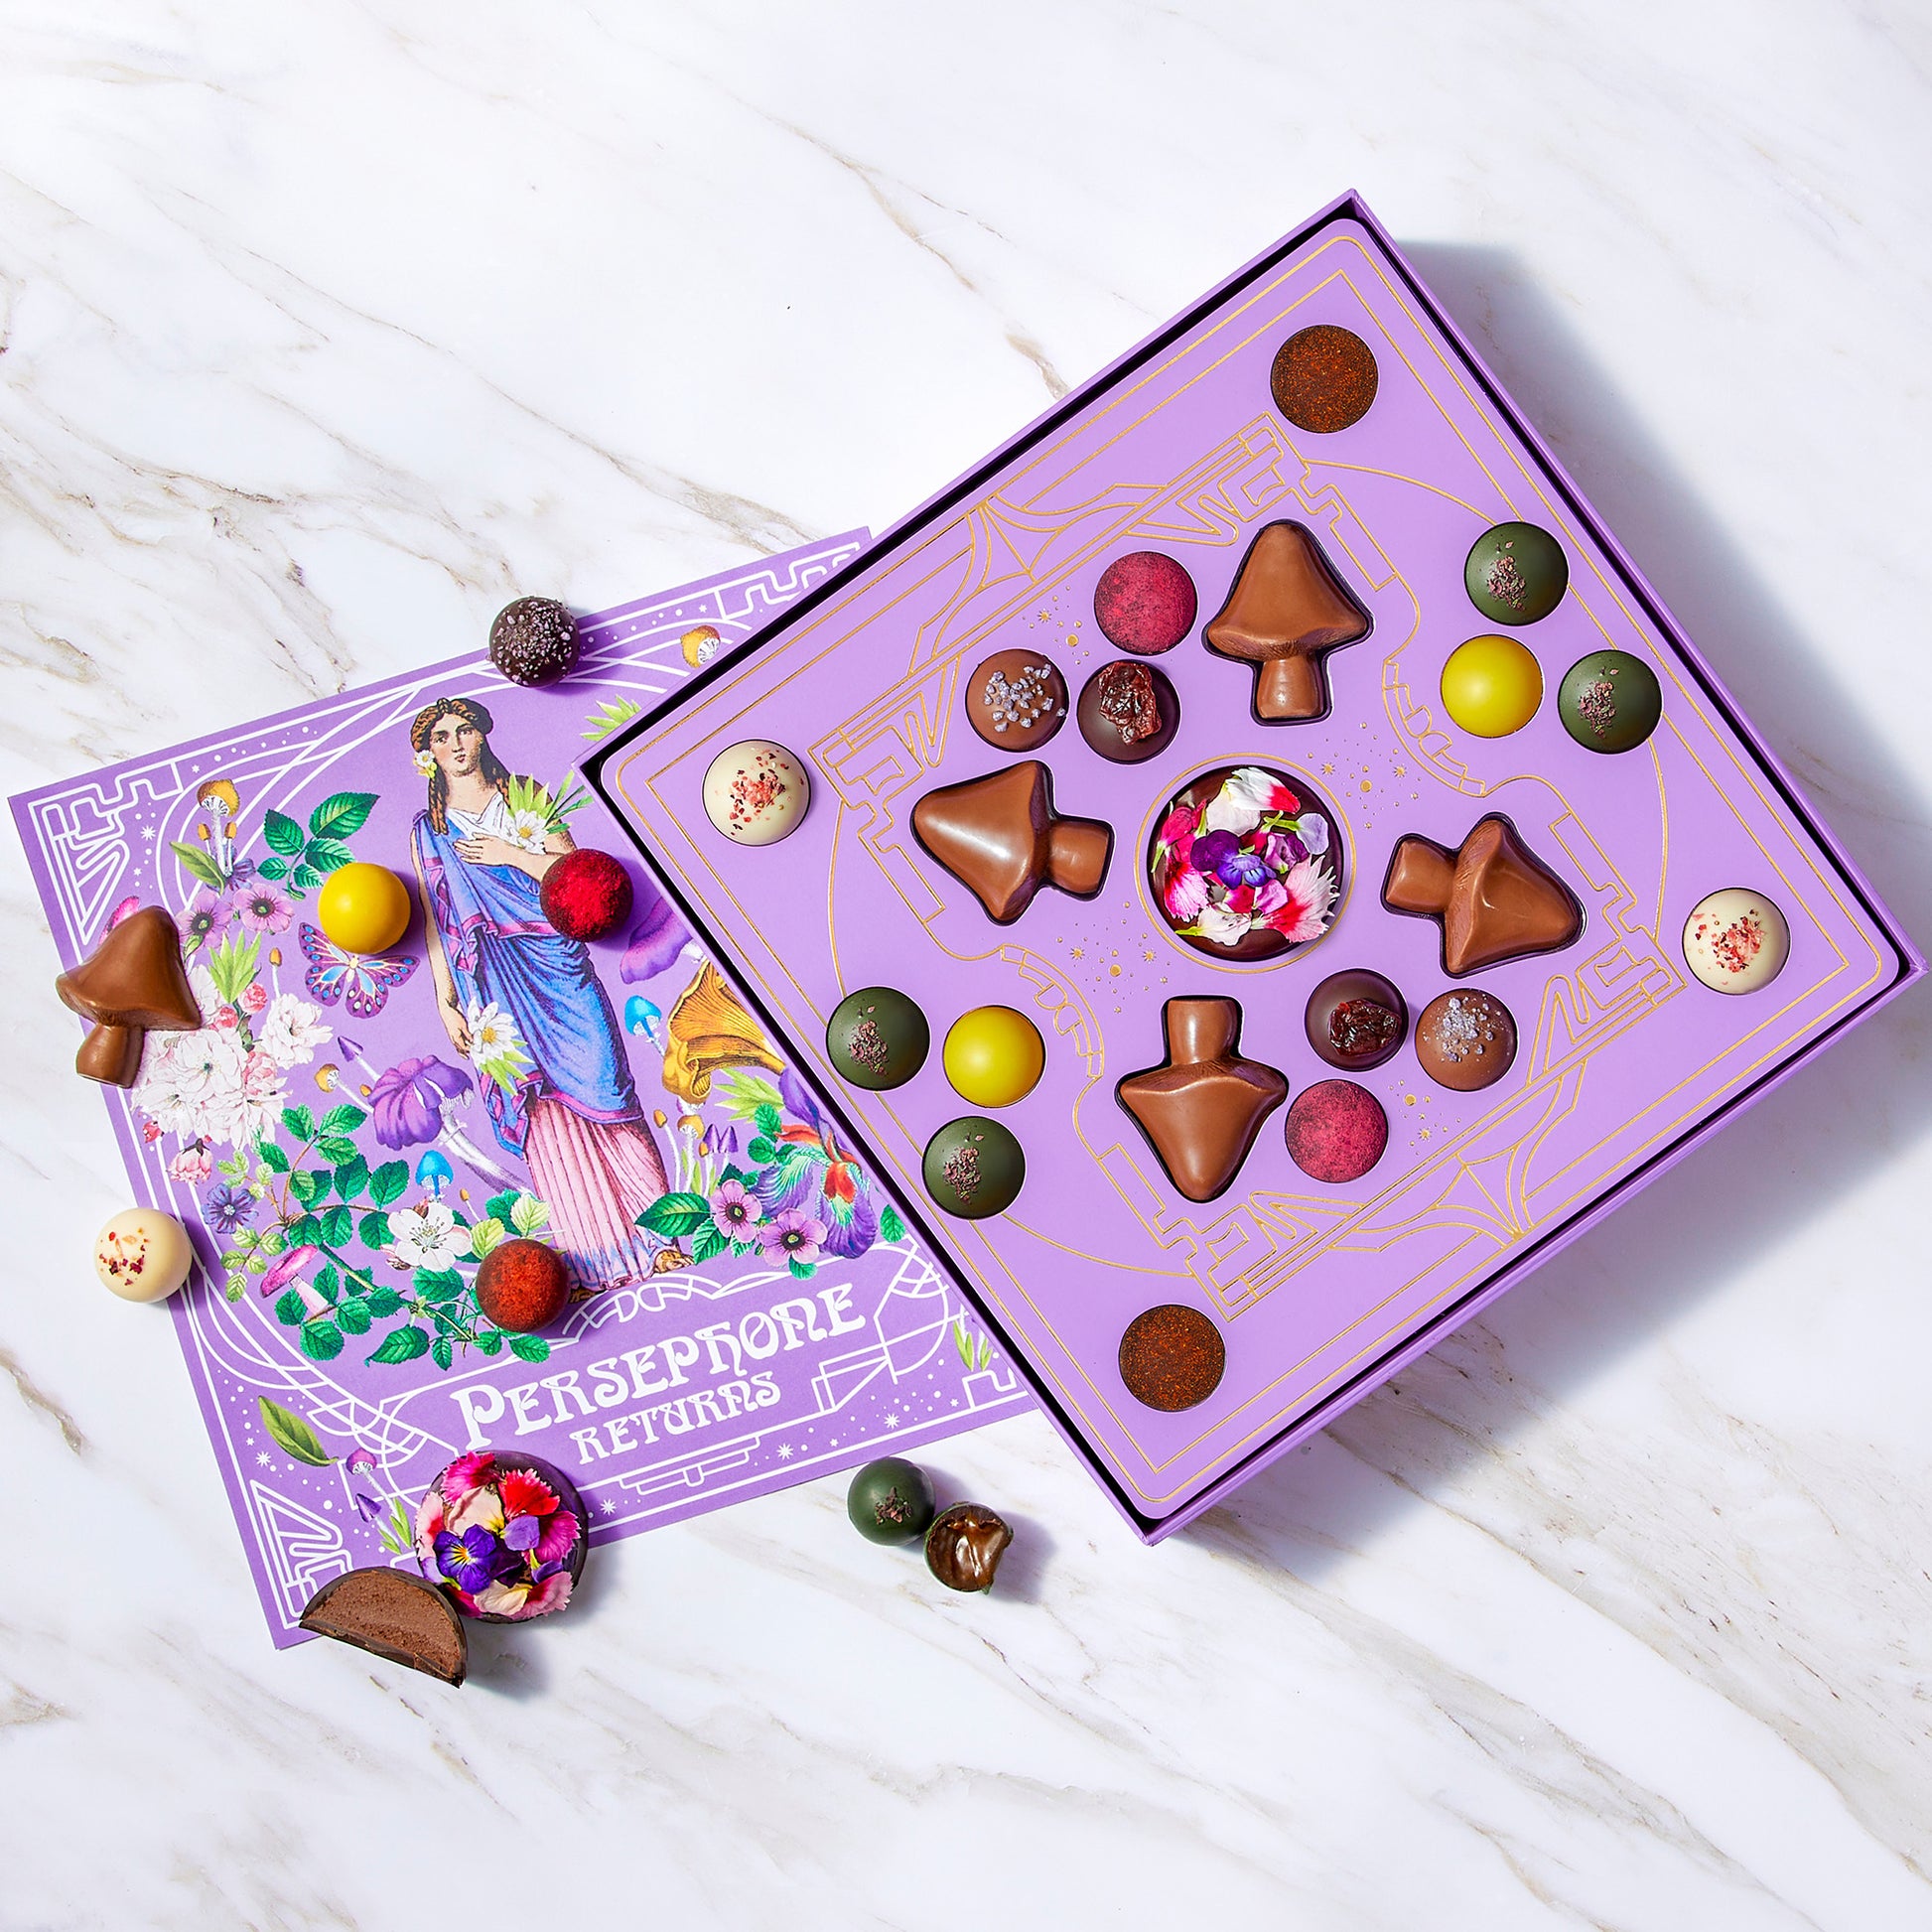 Open box of chocolates and a painting of goddess Persephone surrounded by Vosges Haut-Chocolat Truffles on a grey marble slab.